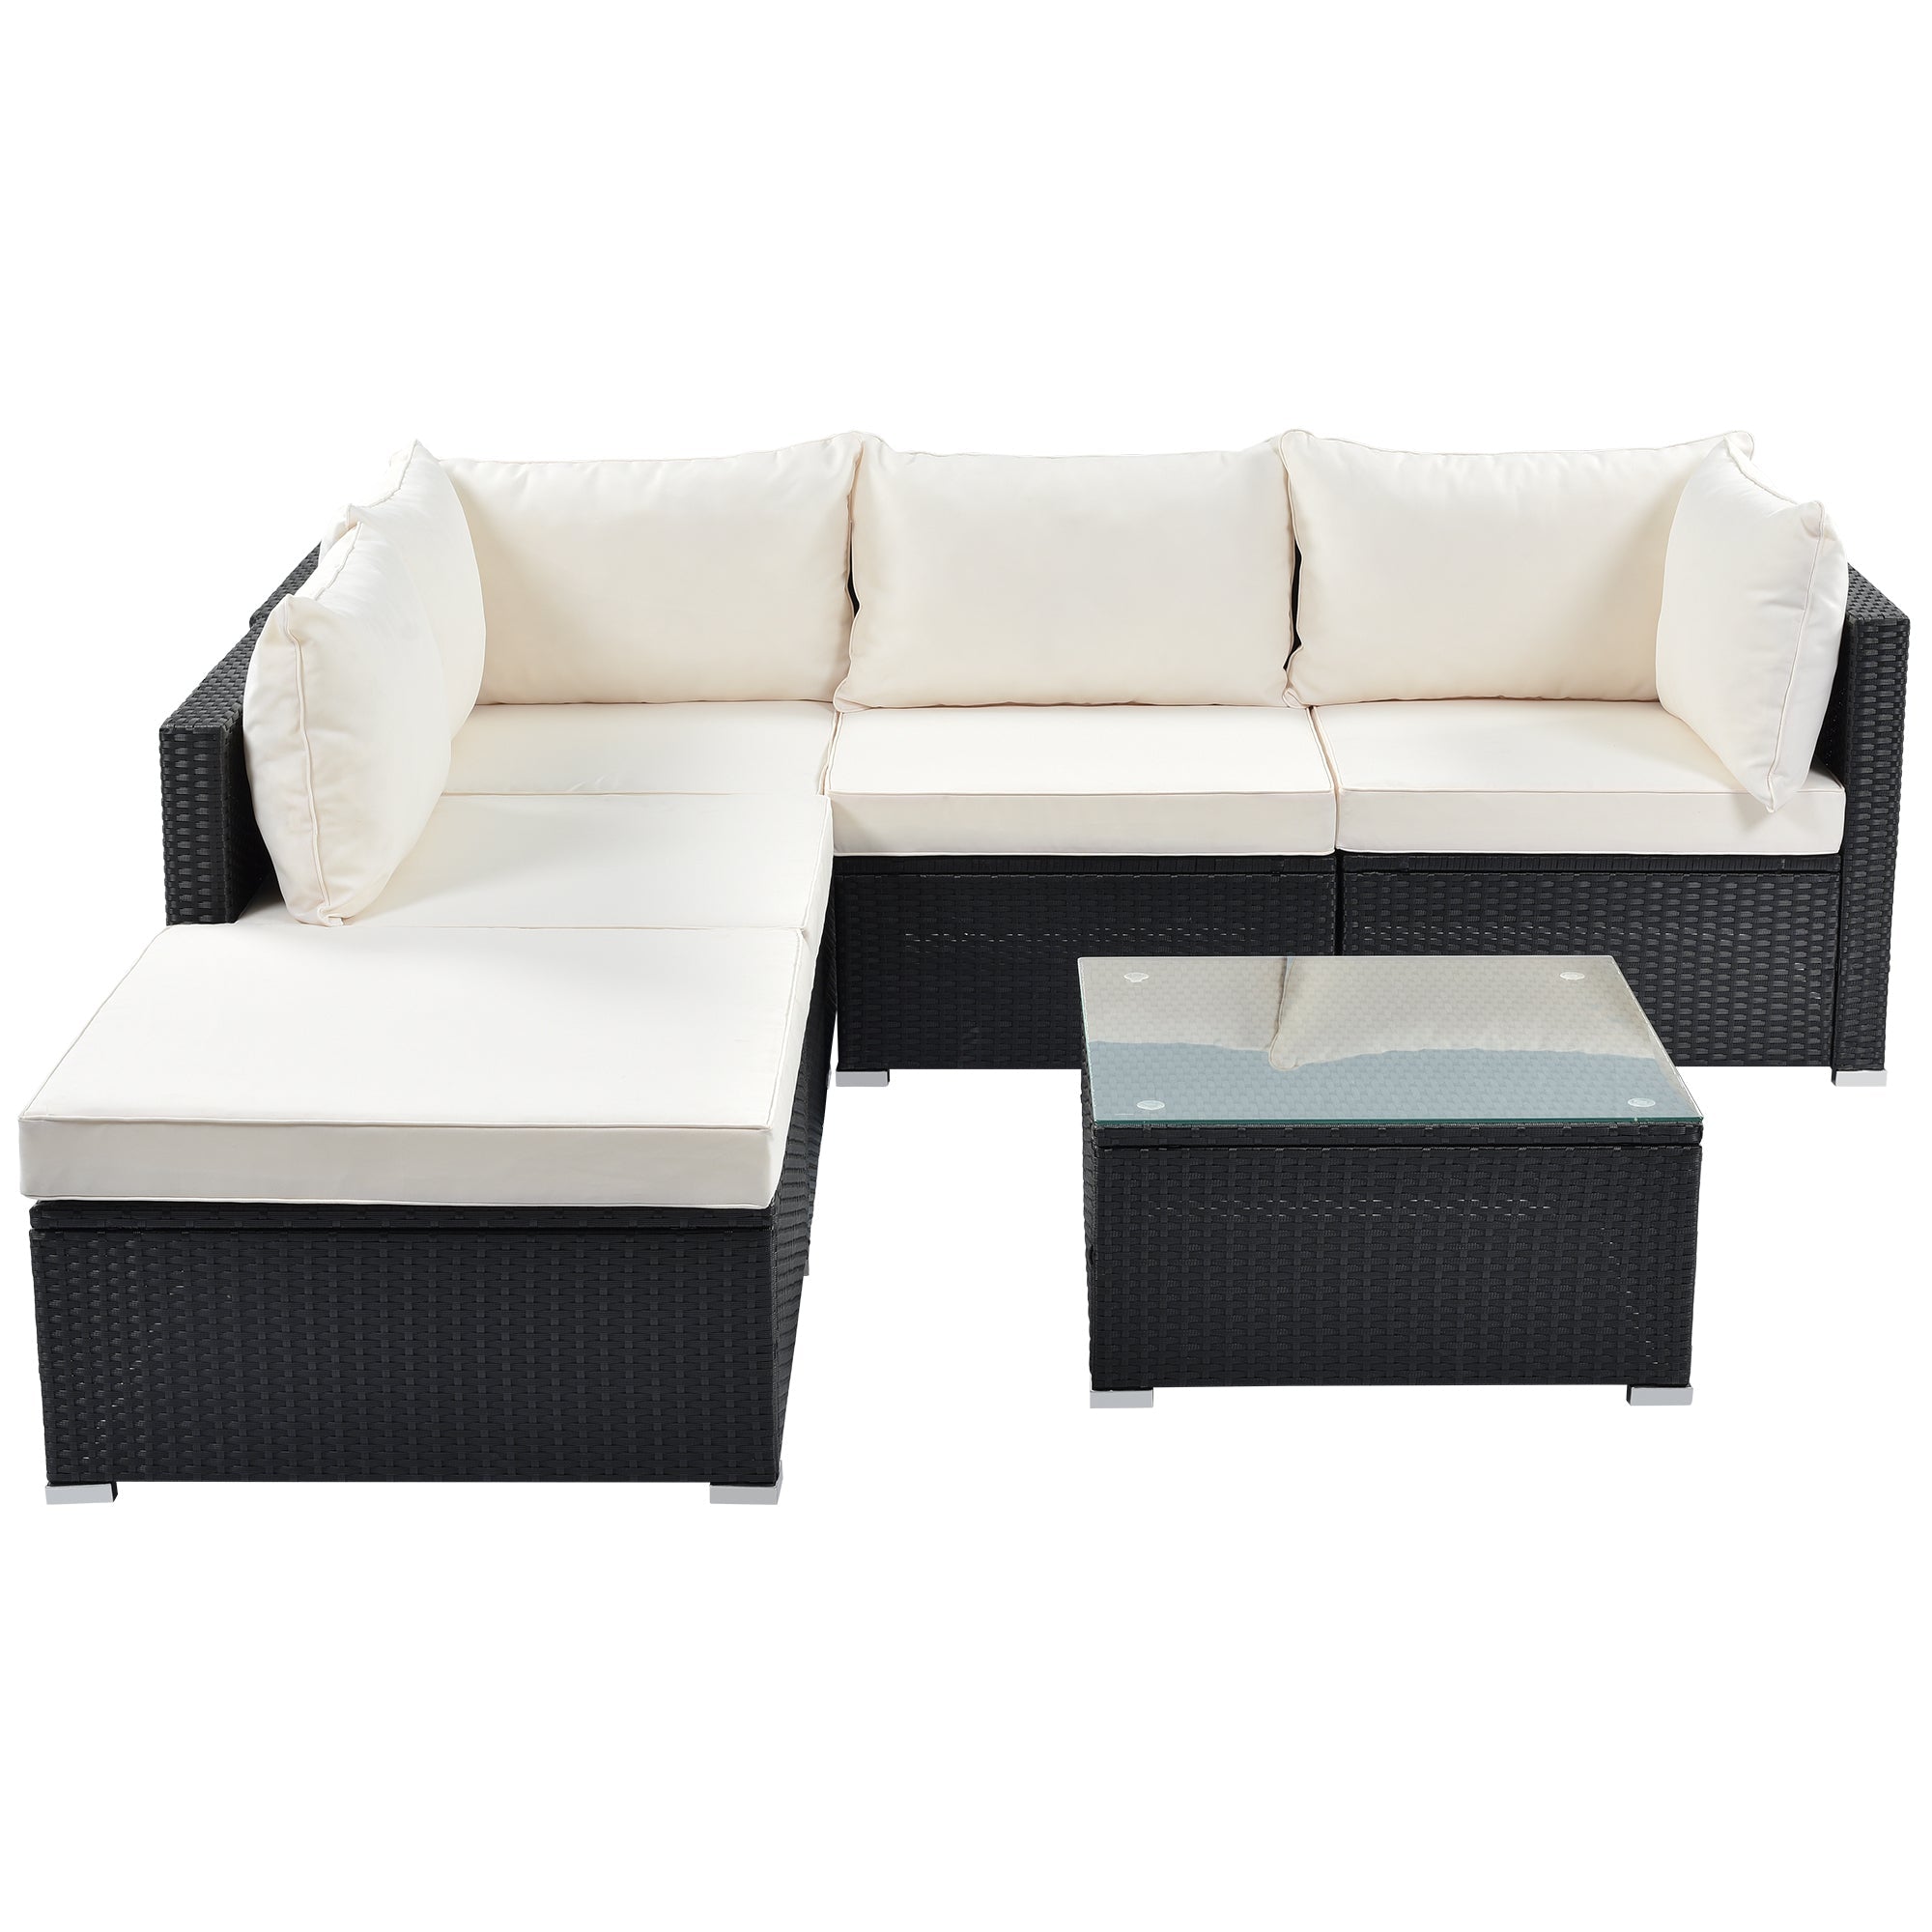 GO 6-Piece Patio Furniture Set corner sofa set with thick removable cushions, PE Rattan Wicker, outdoor Garden Sectional Sofa Chair, removable Beige cushions, Black wicker